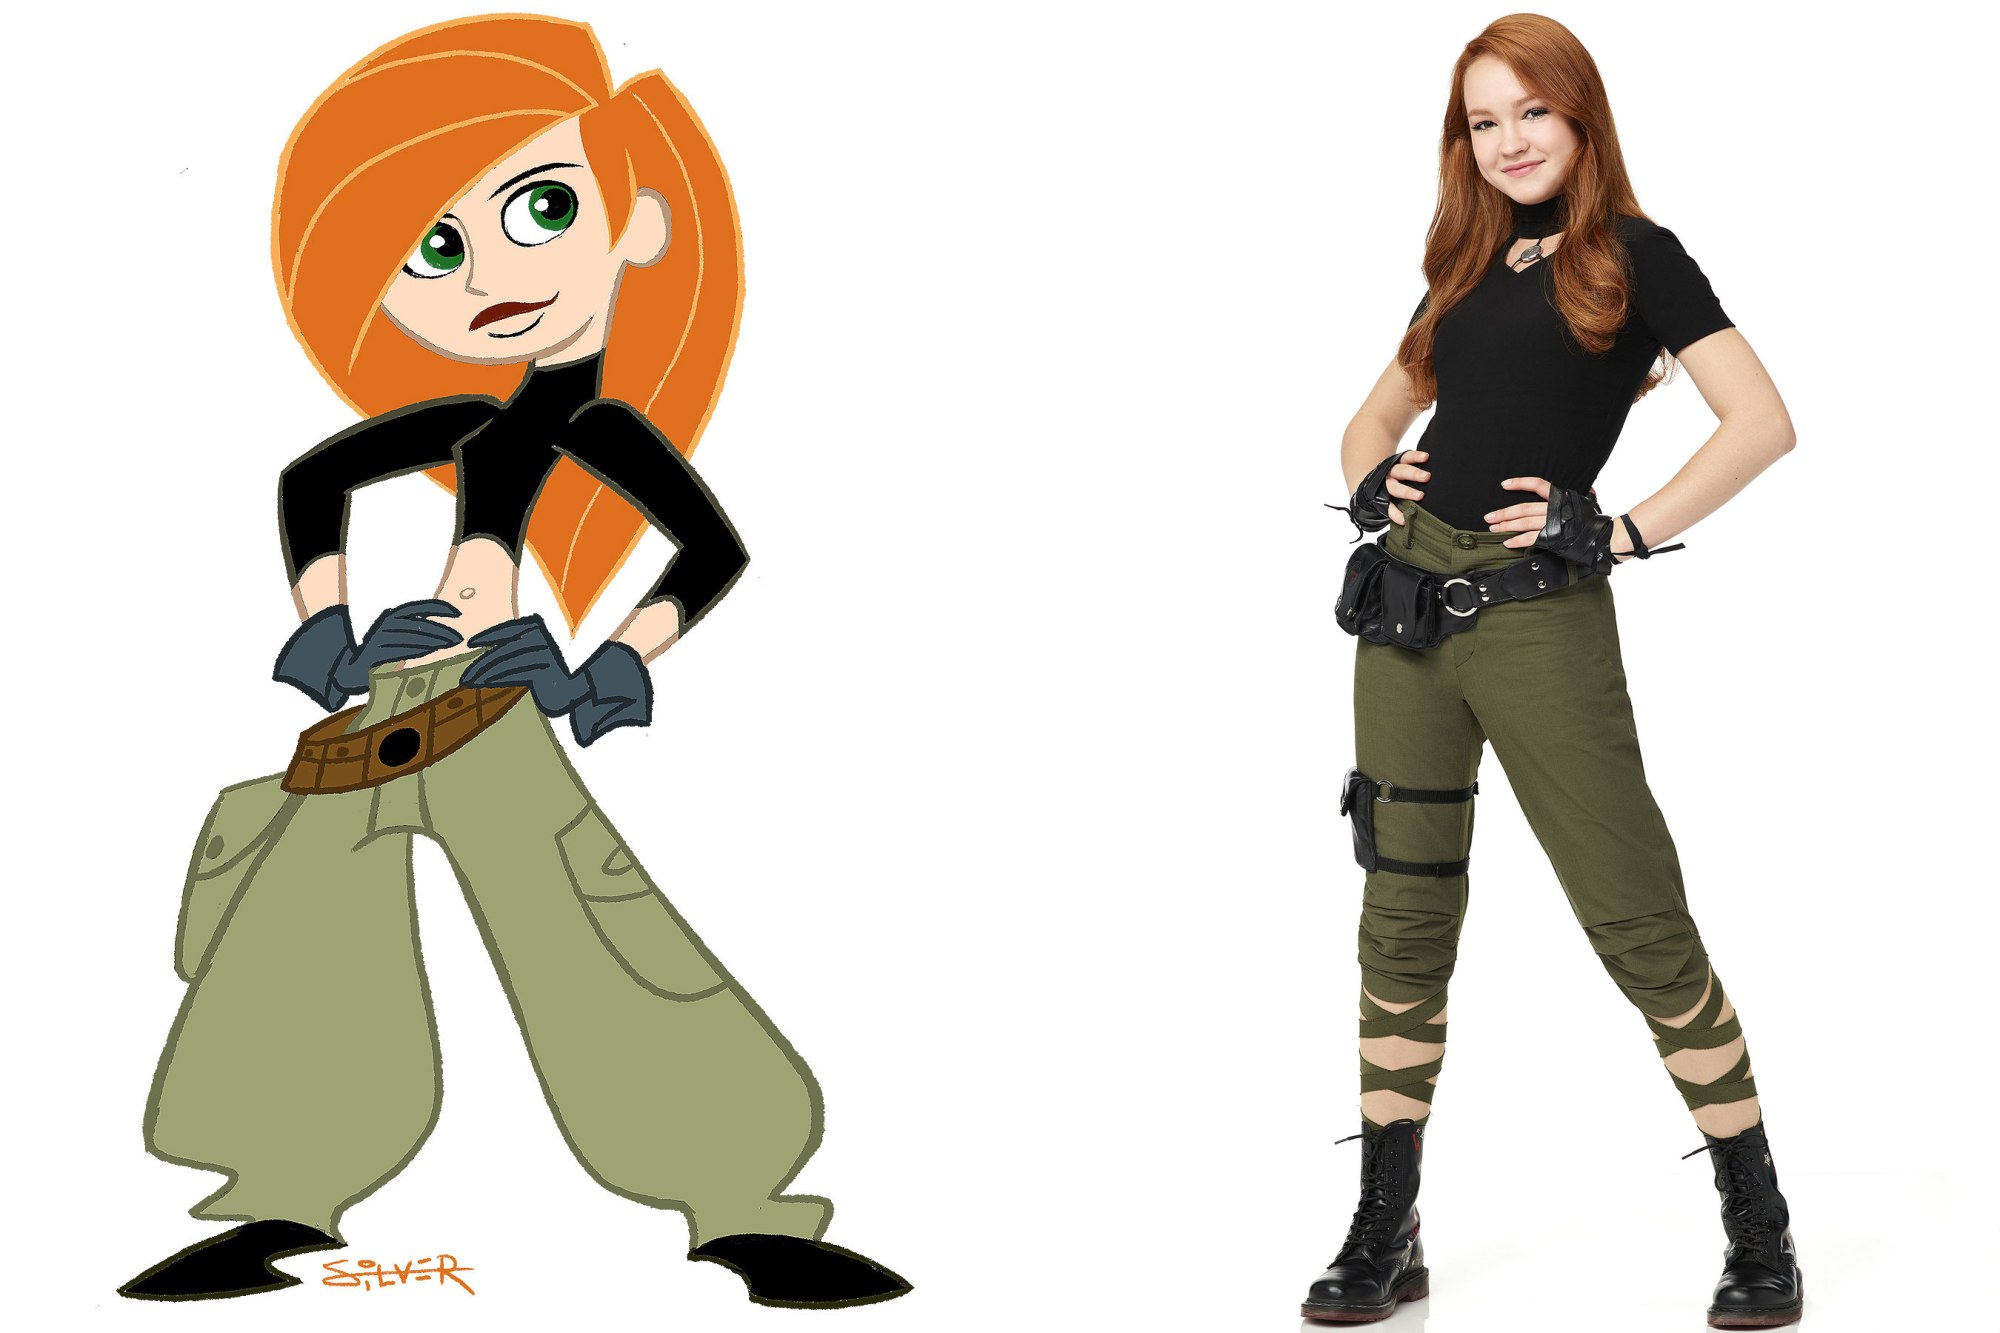 Disney Shares First Look at Live-Action Kim Possible